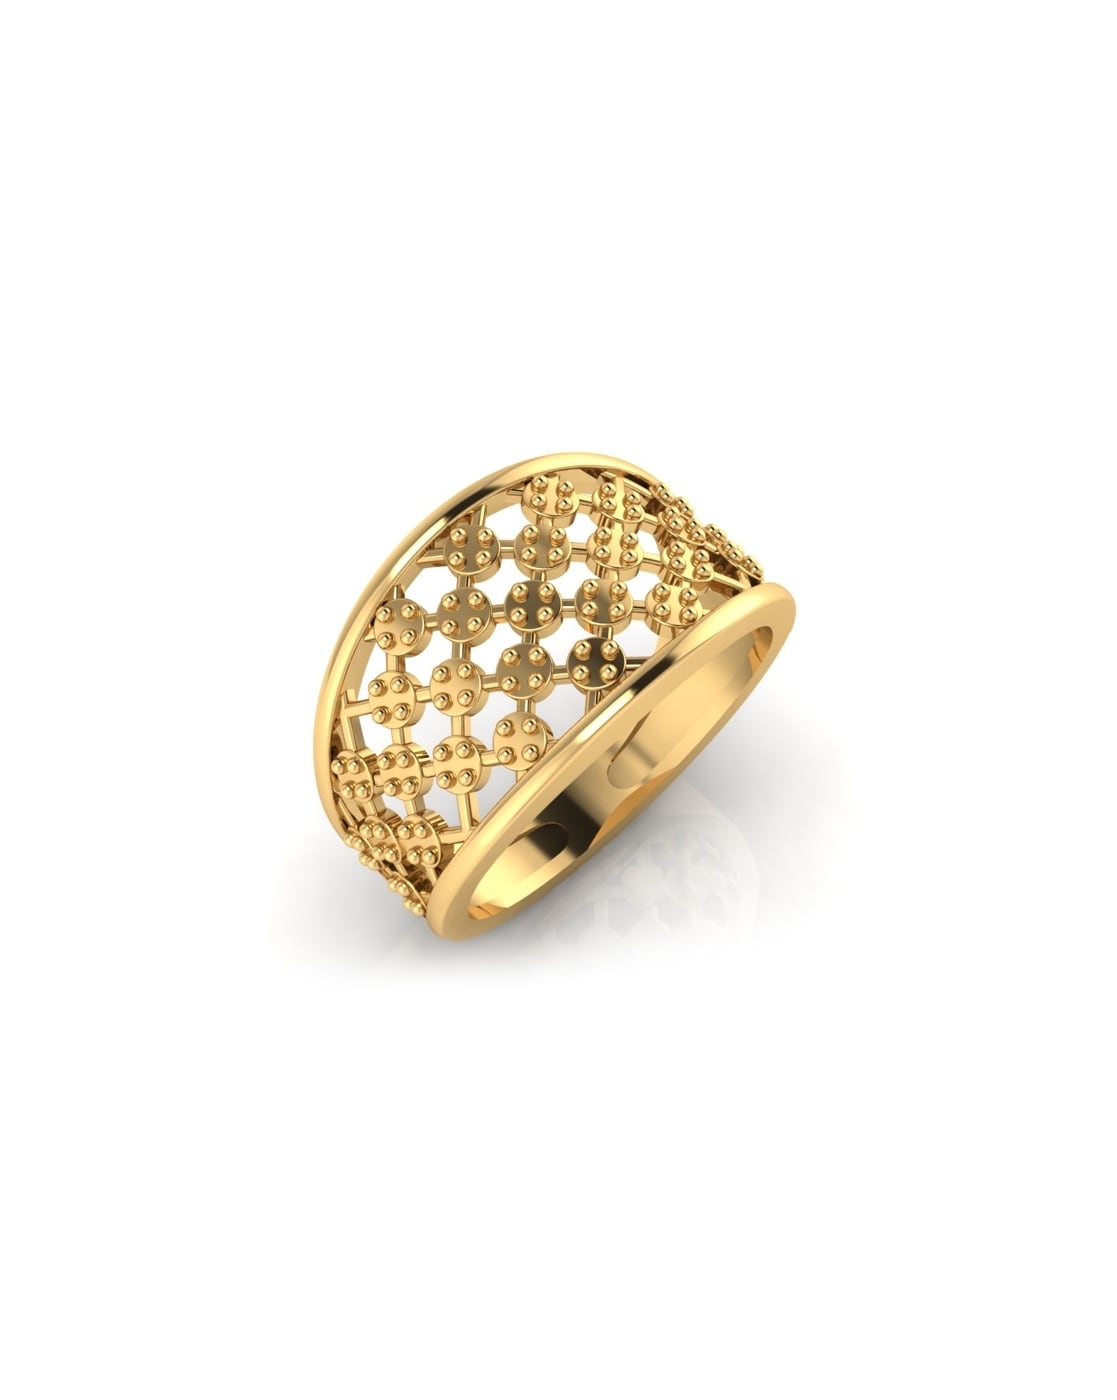 14KT Gold Ring For Women In Free Flow Design With Diamonds